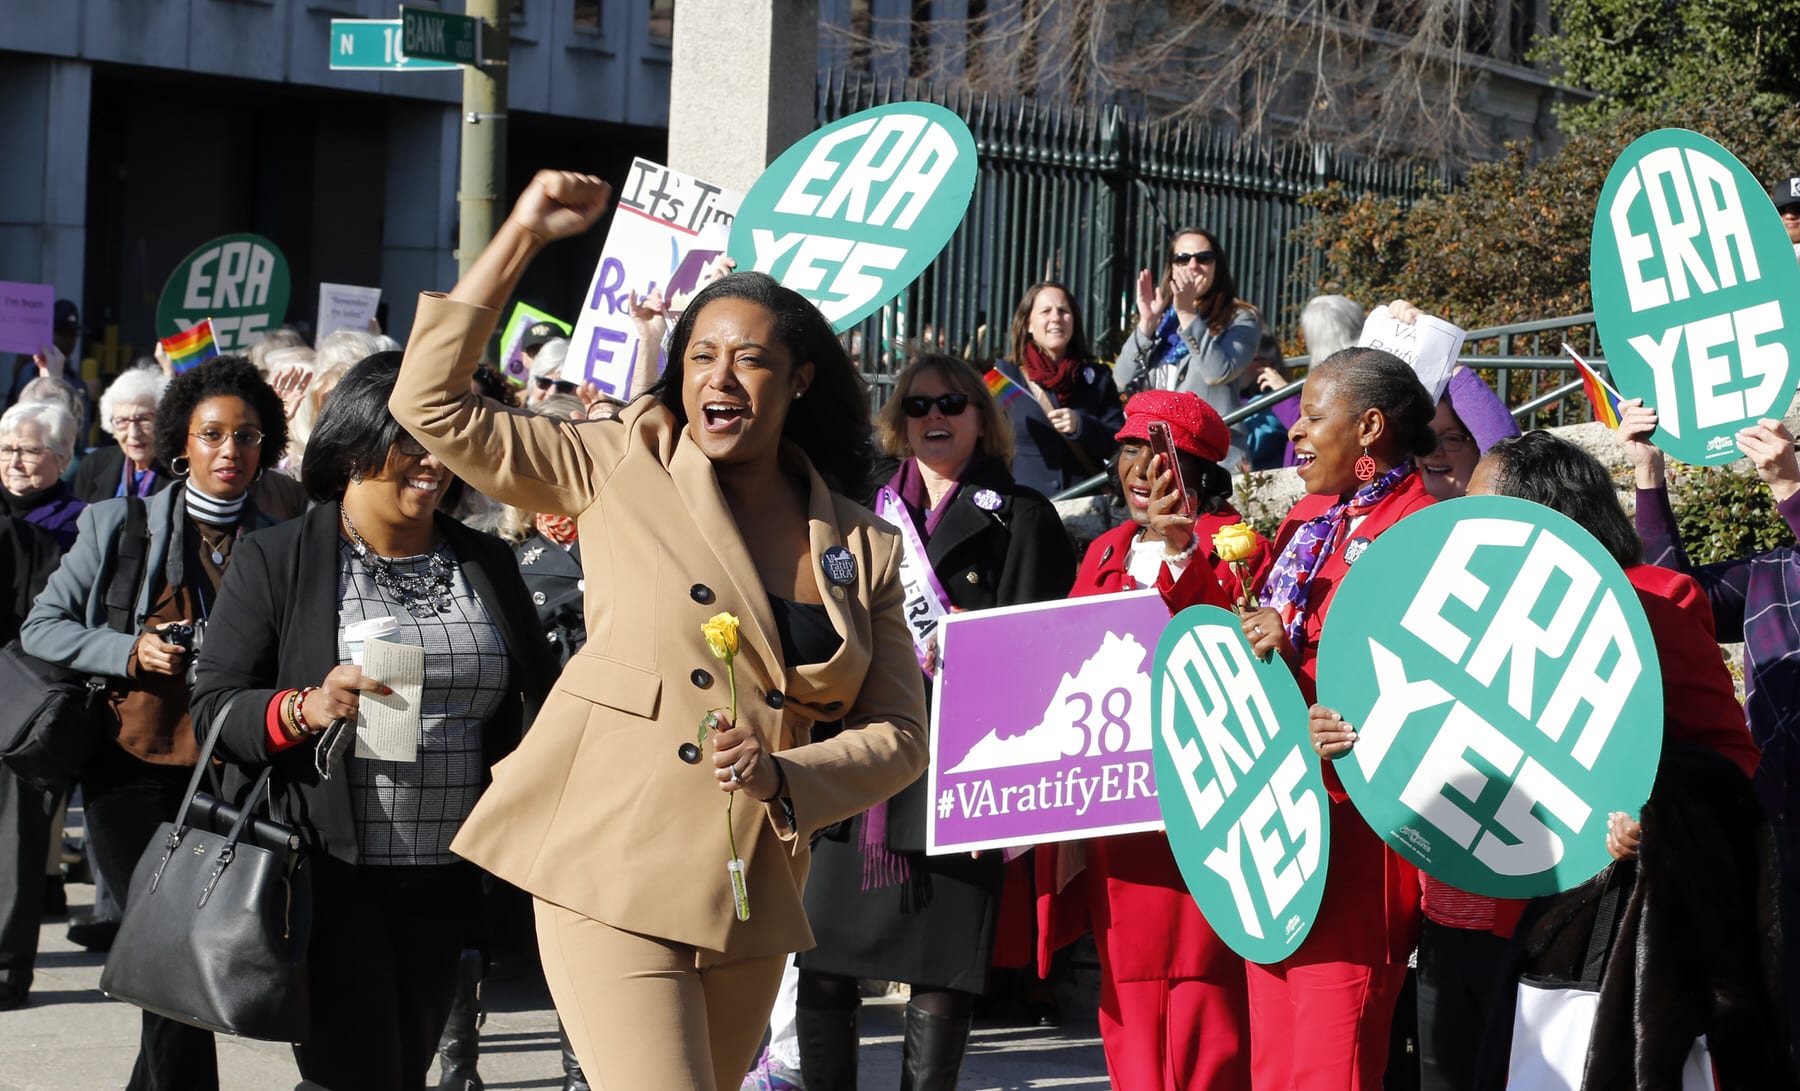 Delegate Jennifer Carroll Foy, D-Price William, cheers on Equal Rights Amendment demonstrators outside the Capitol in Richmond, VA.